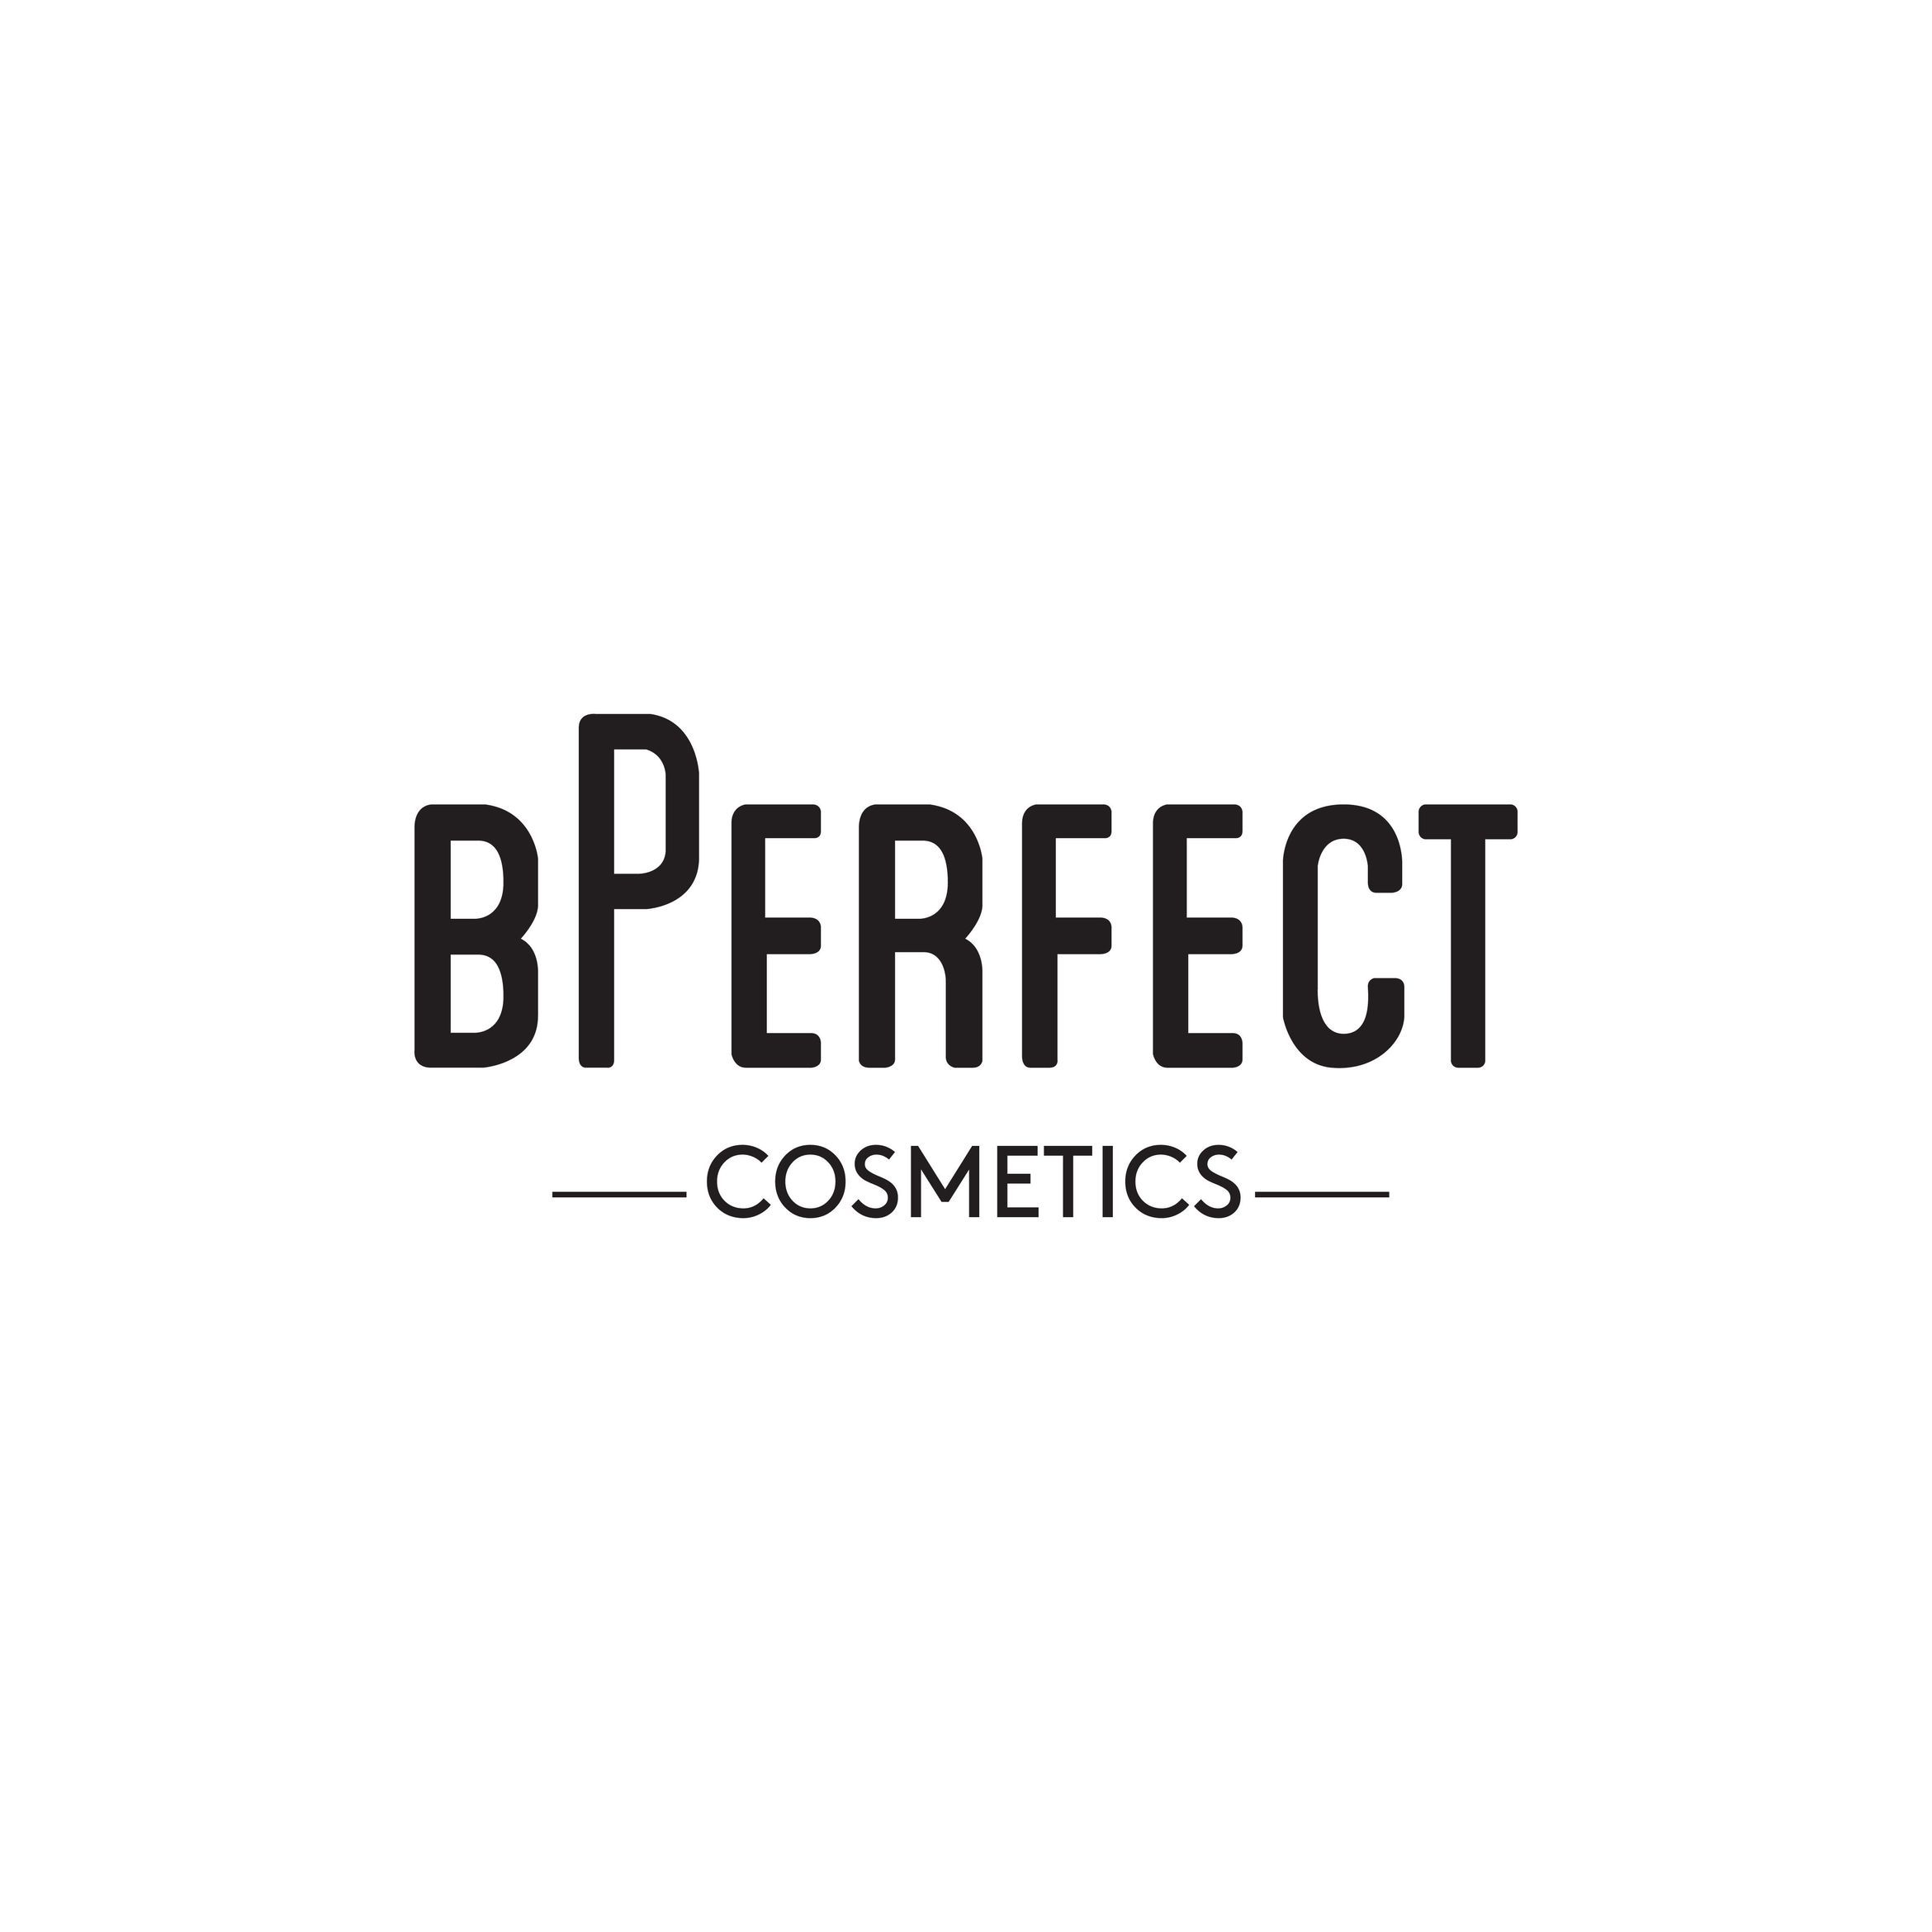 BPerfect Cosmetics Derry, 19 orchard st, londonderry, BT48 6XY, Londonderry, Northern Ireland